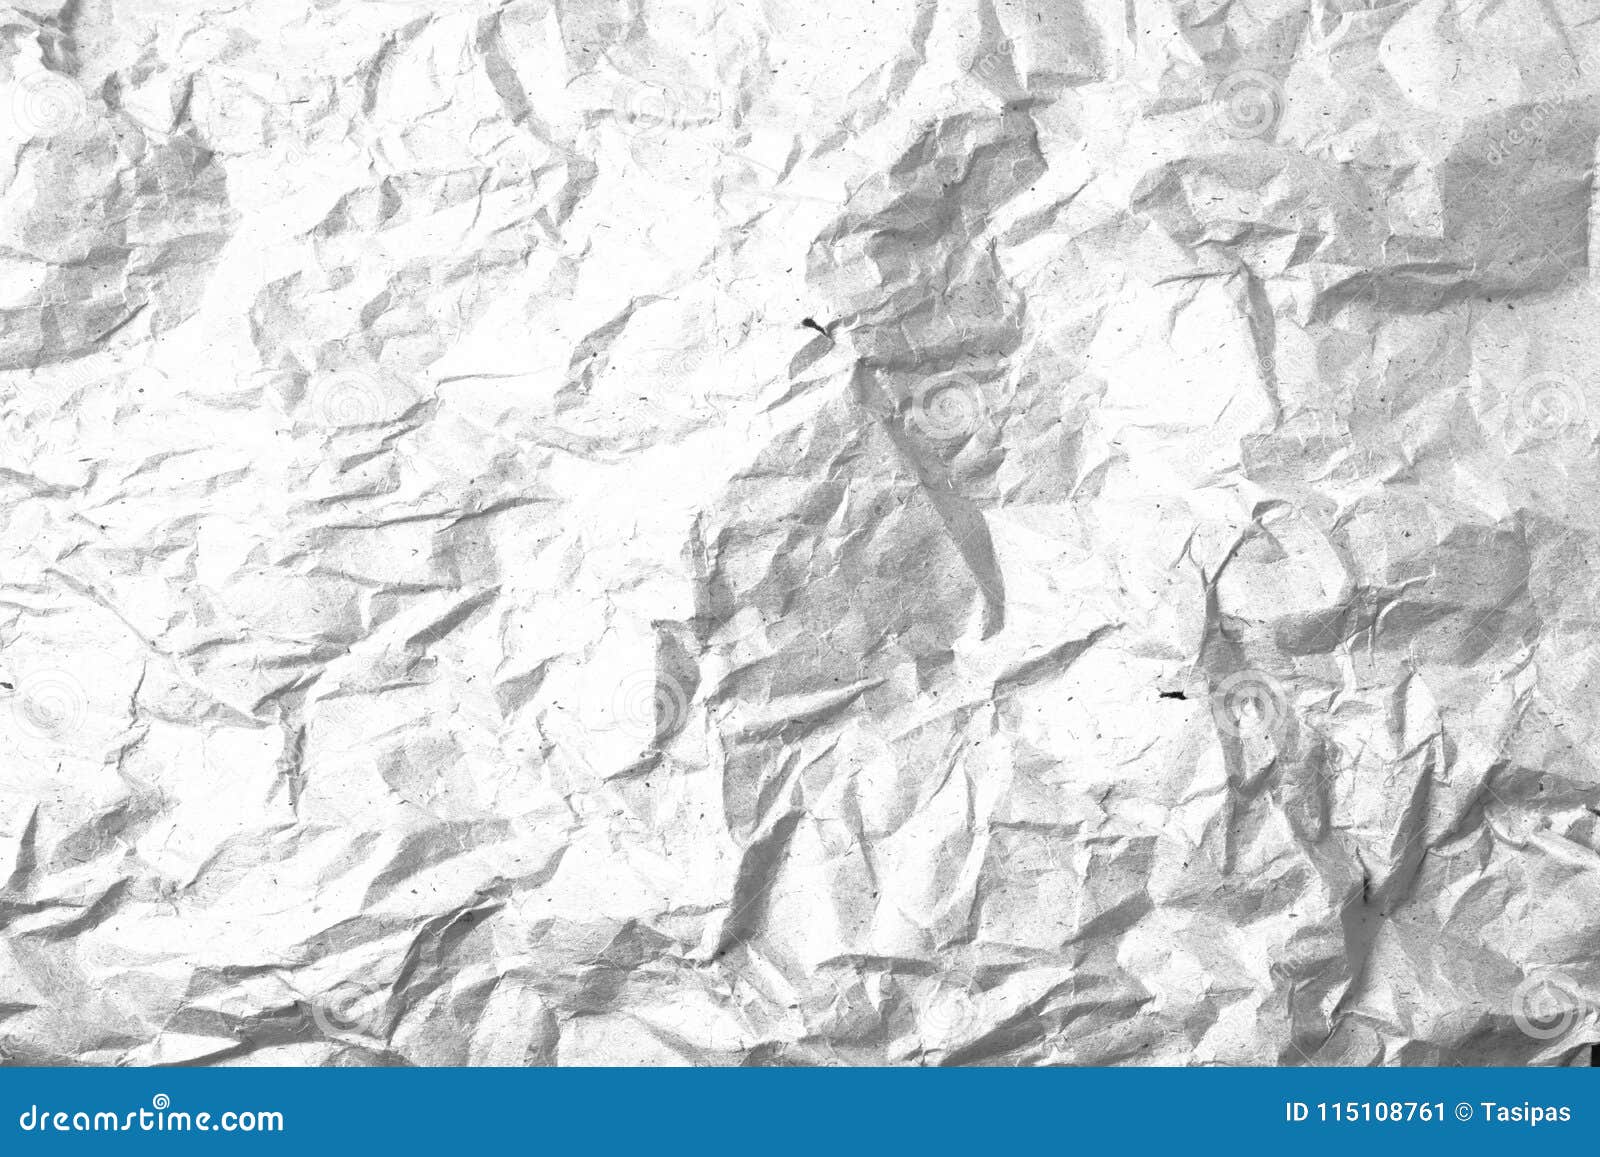 Grunge Crumpled Paper Overlay Background Stock Image Image Of Paper Sheet